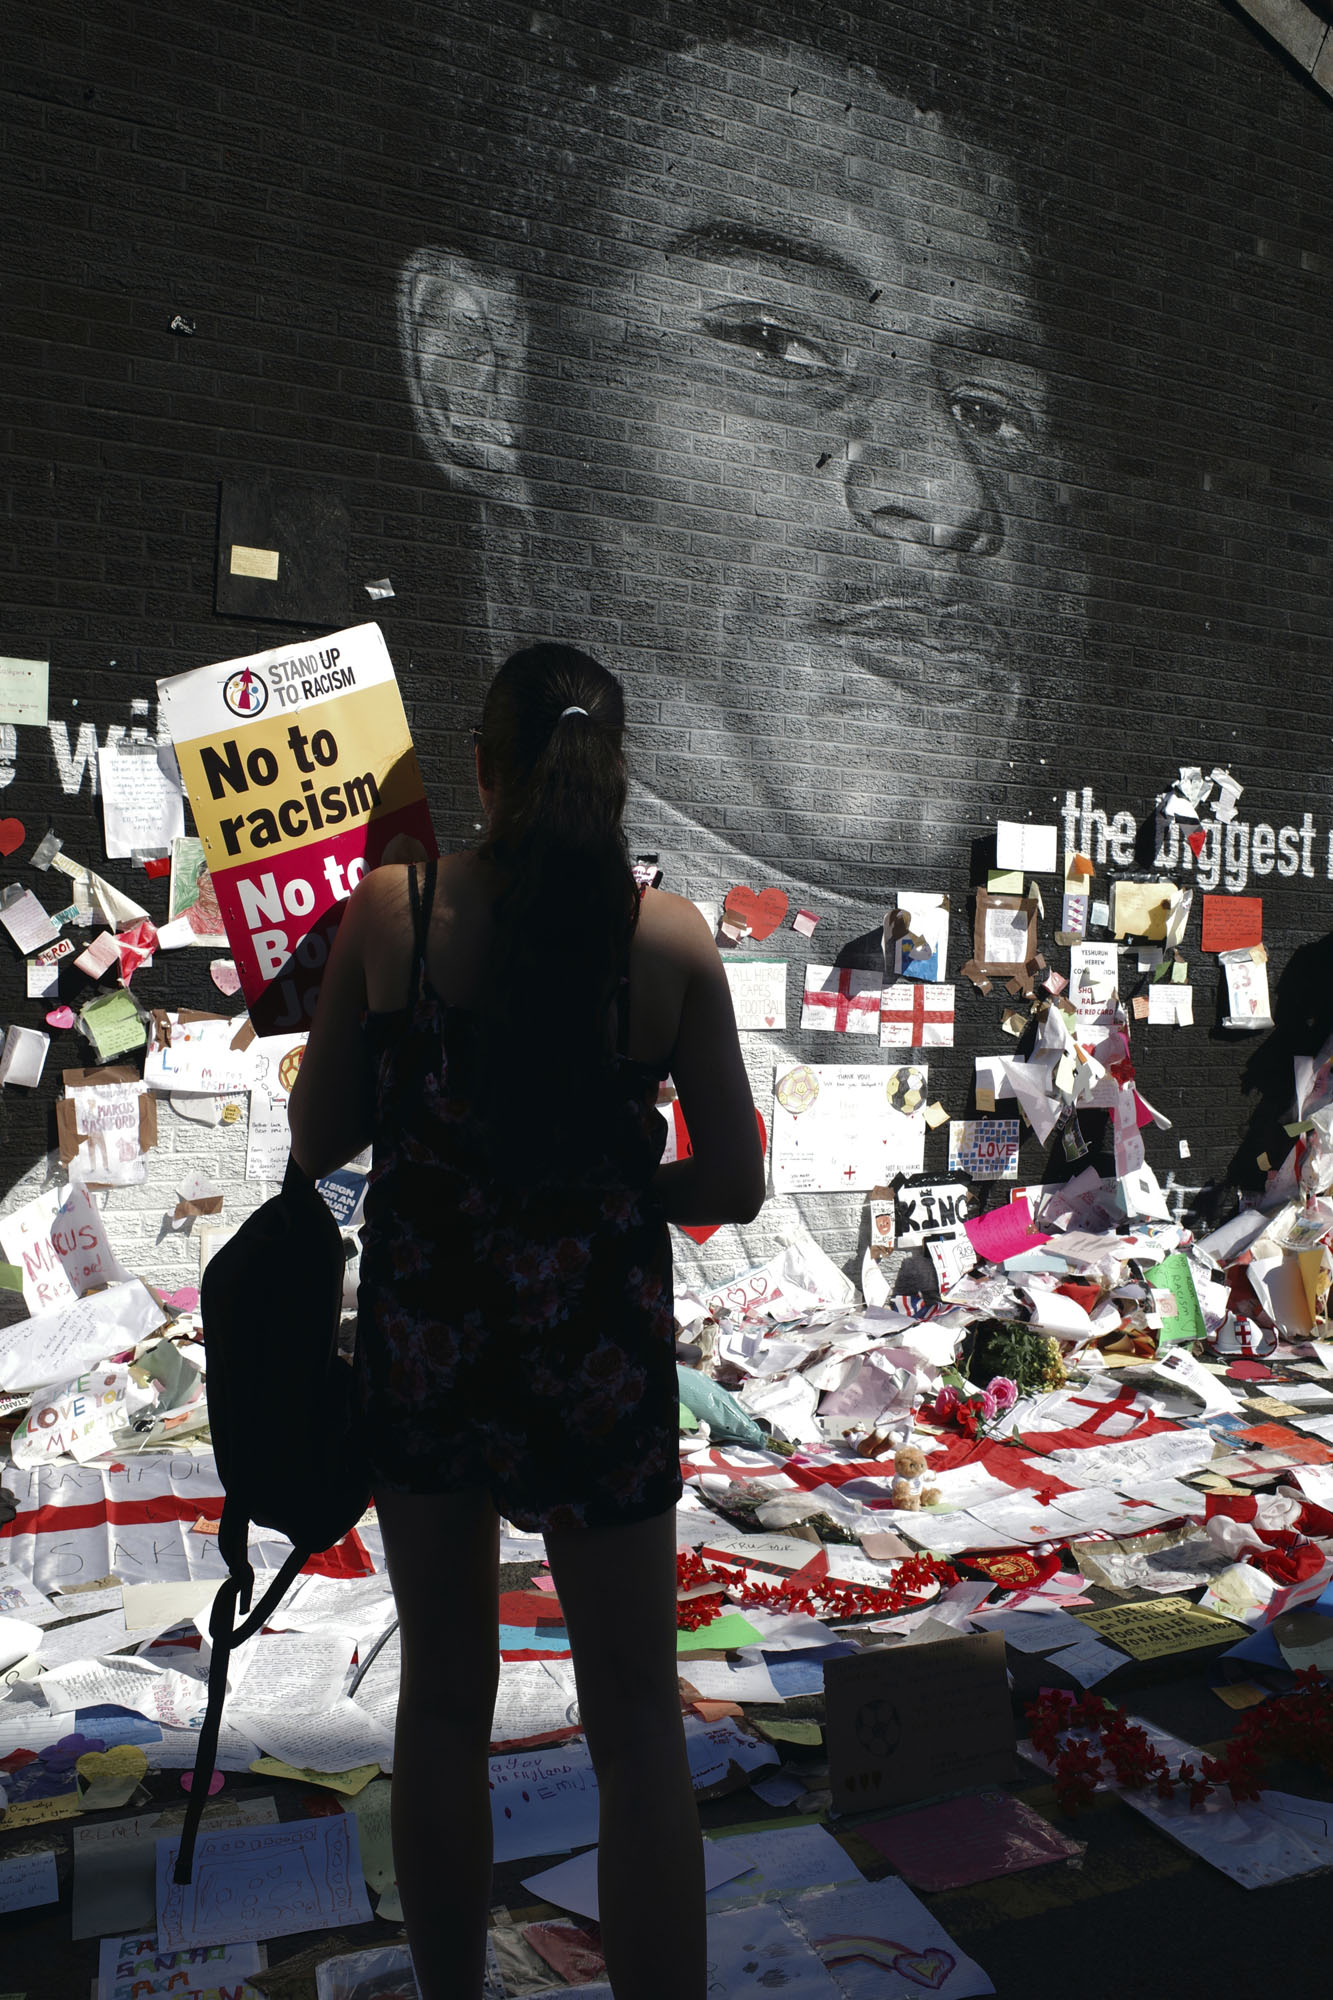 A woman standing in front of the Marcus Rashford mural in Withington, with posters, flowers and flags on the ground and wall.